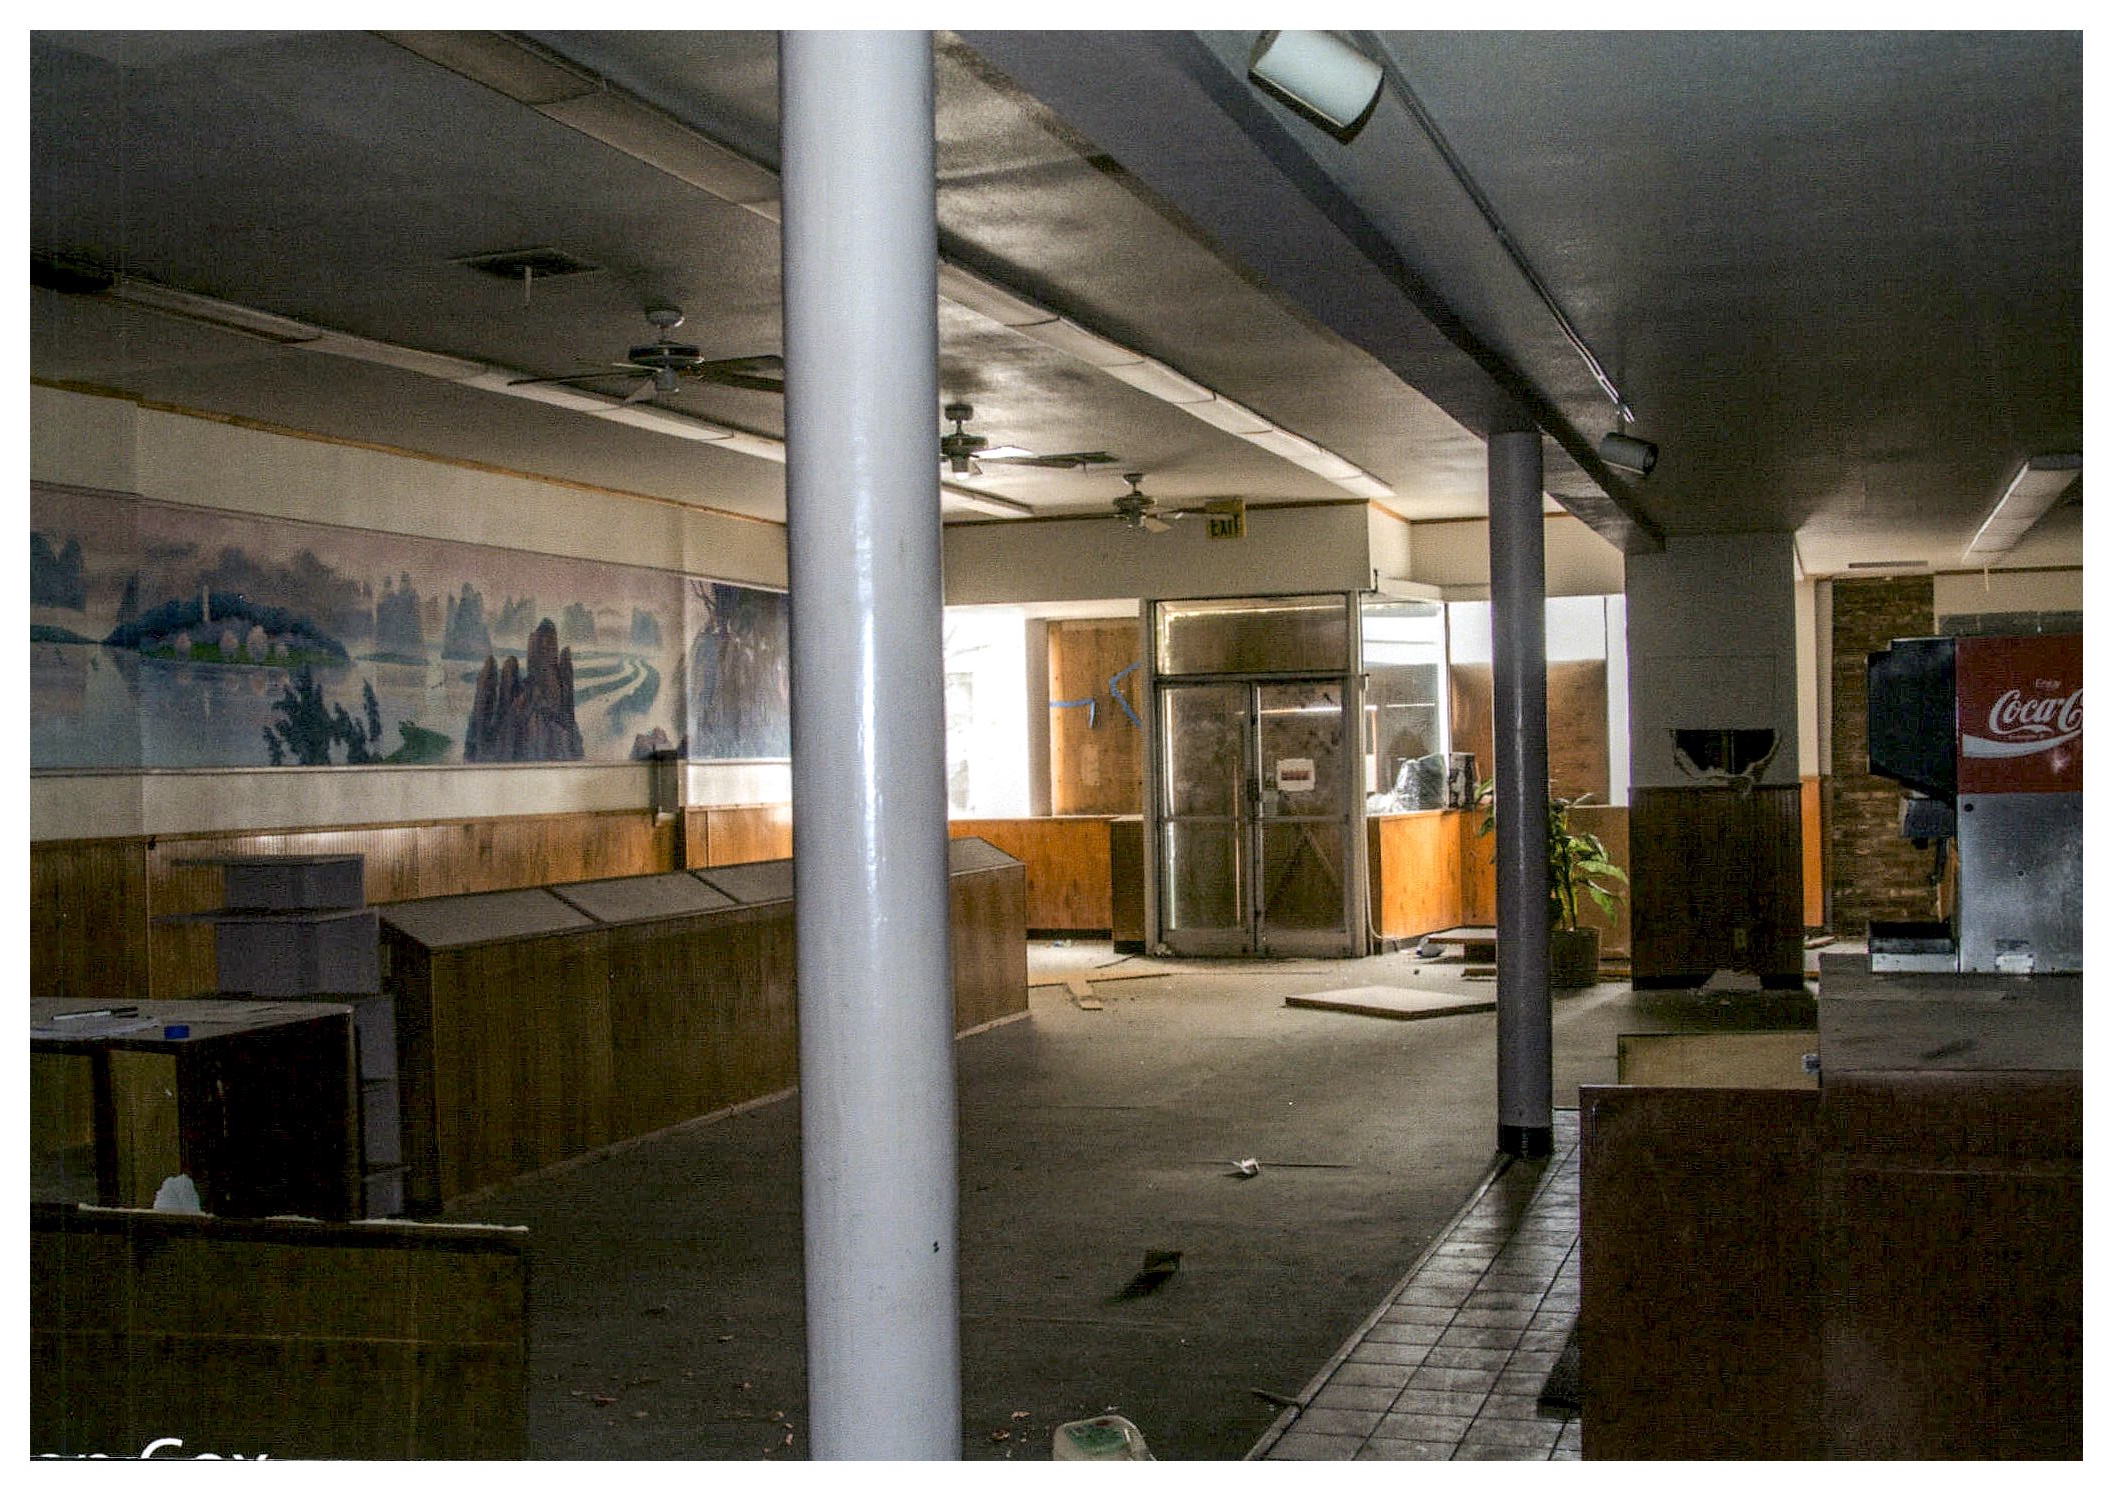 Before: interior view of the former restaurant occupying the retail space.